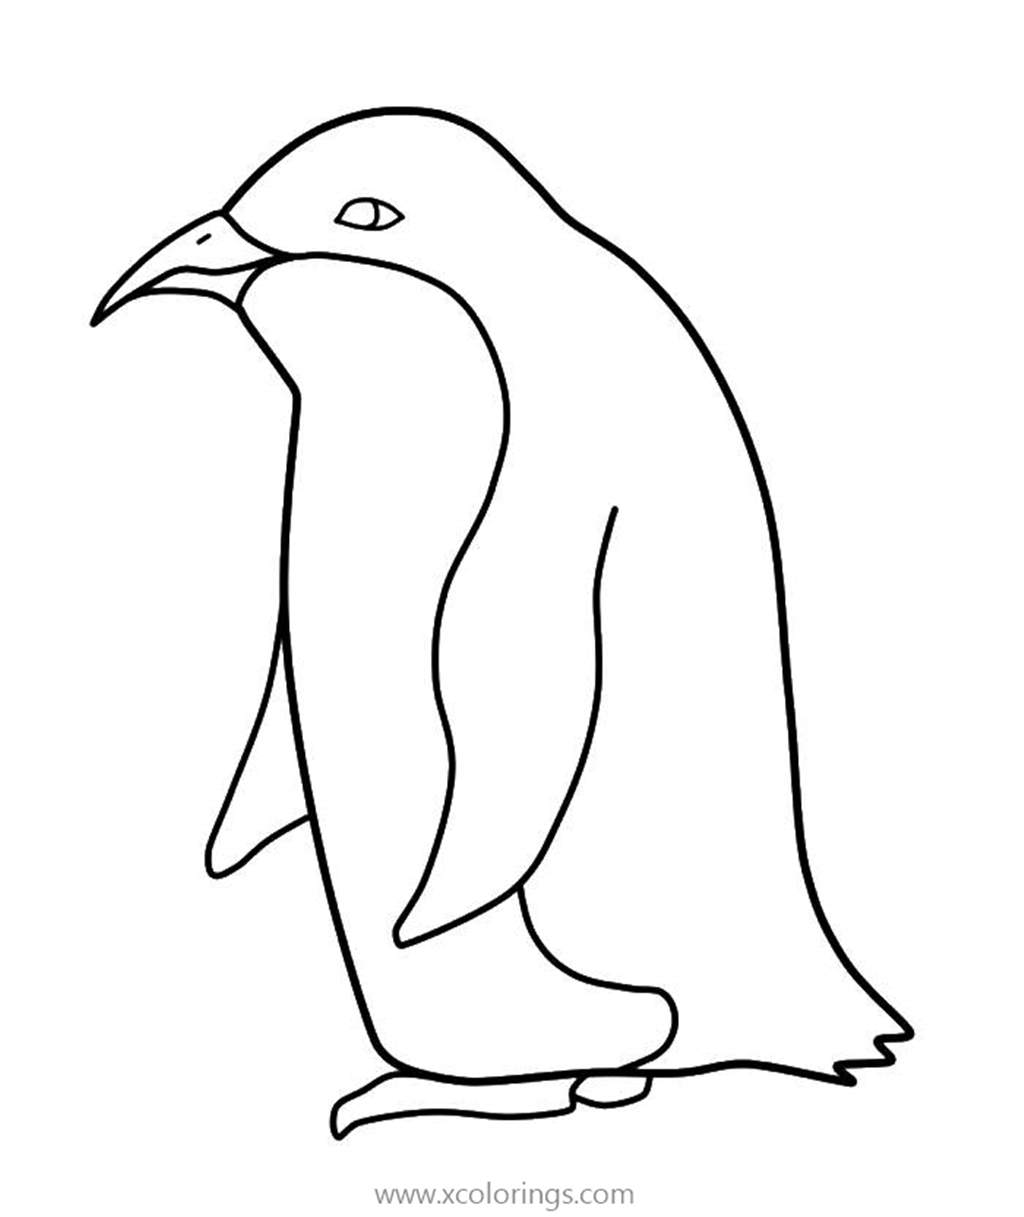 Free Penguin Coloring Page Easy for Preschoolers printable